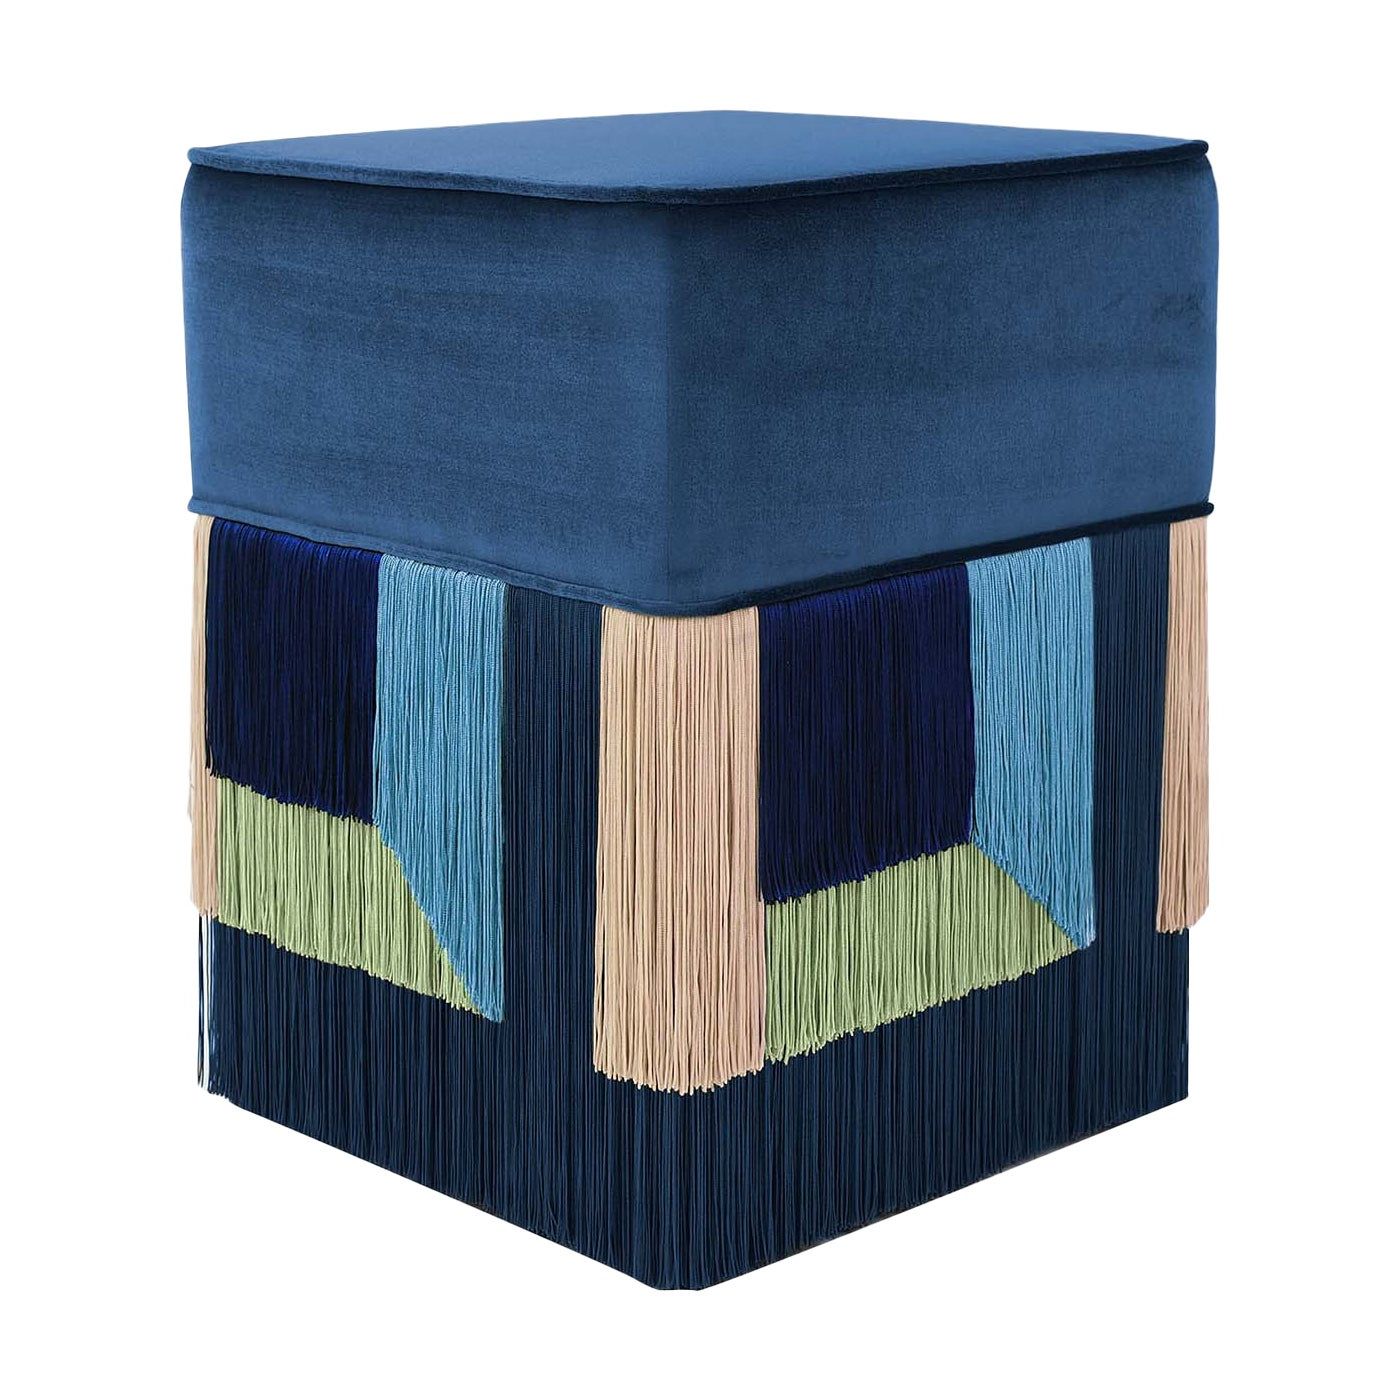 Recent Brushed Geometric Pattern Ottomans With Regard To Couture Geometric Giò Purple Ottoman For Sale At 1stdibs (View 1 of 10)